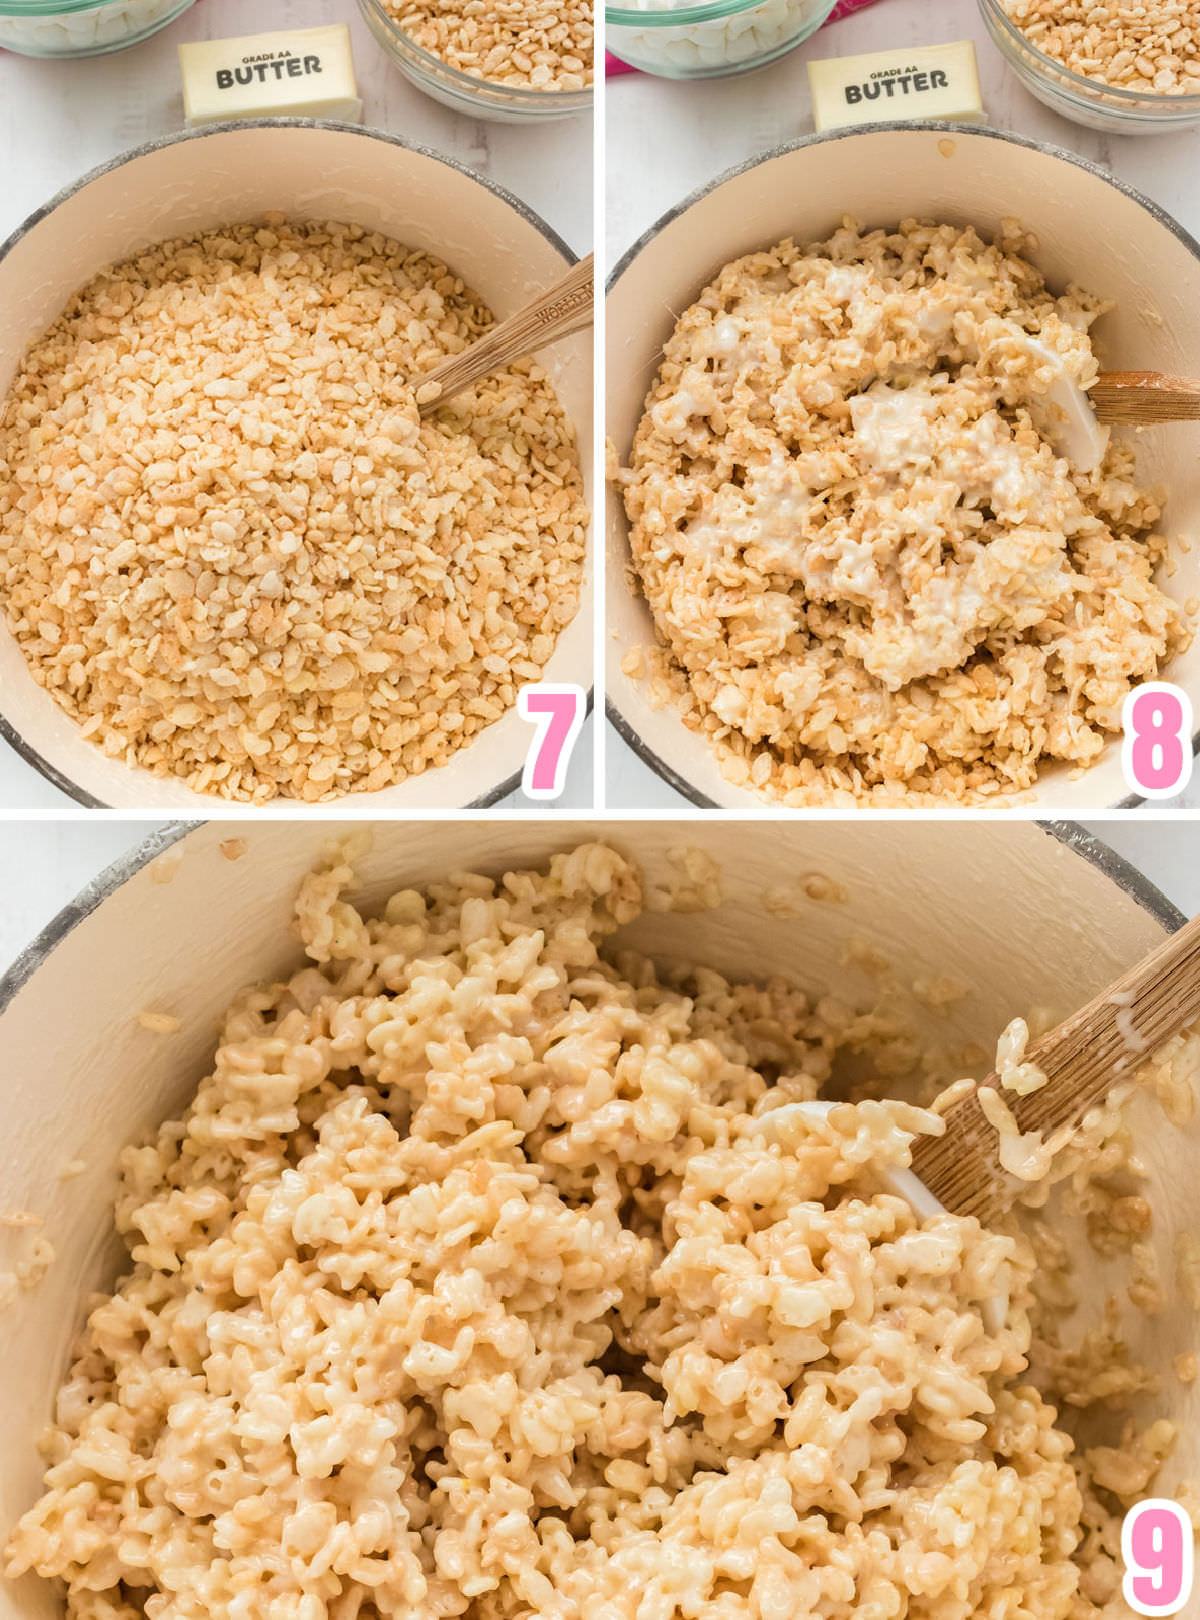 Collage image showing the steps for coating the Rice Krispie Cereal with the marshmallow mixture.